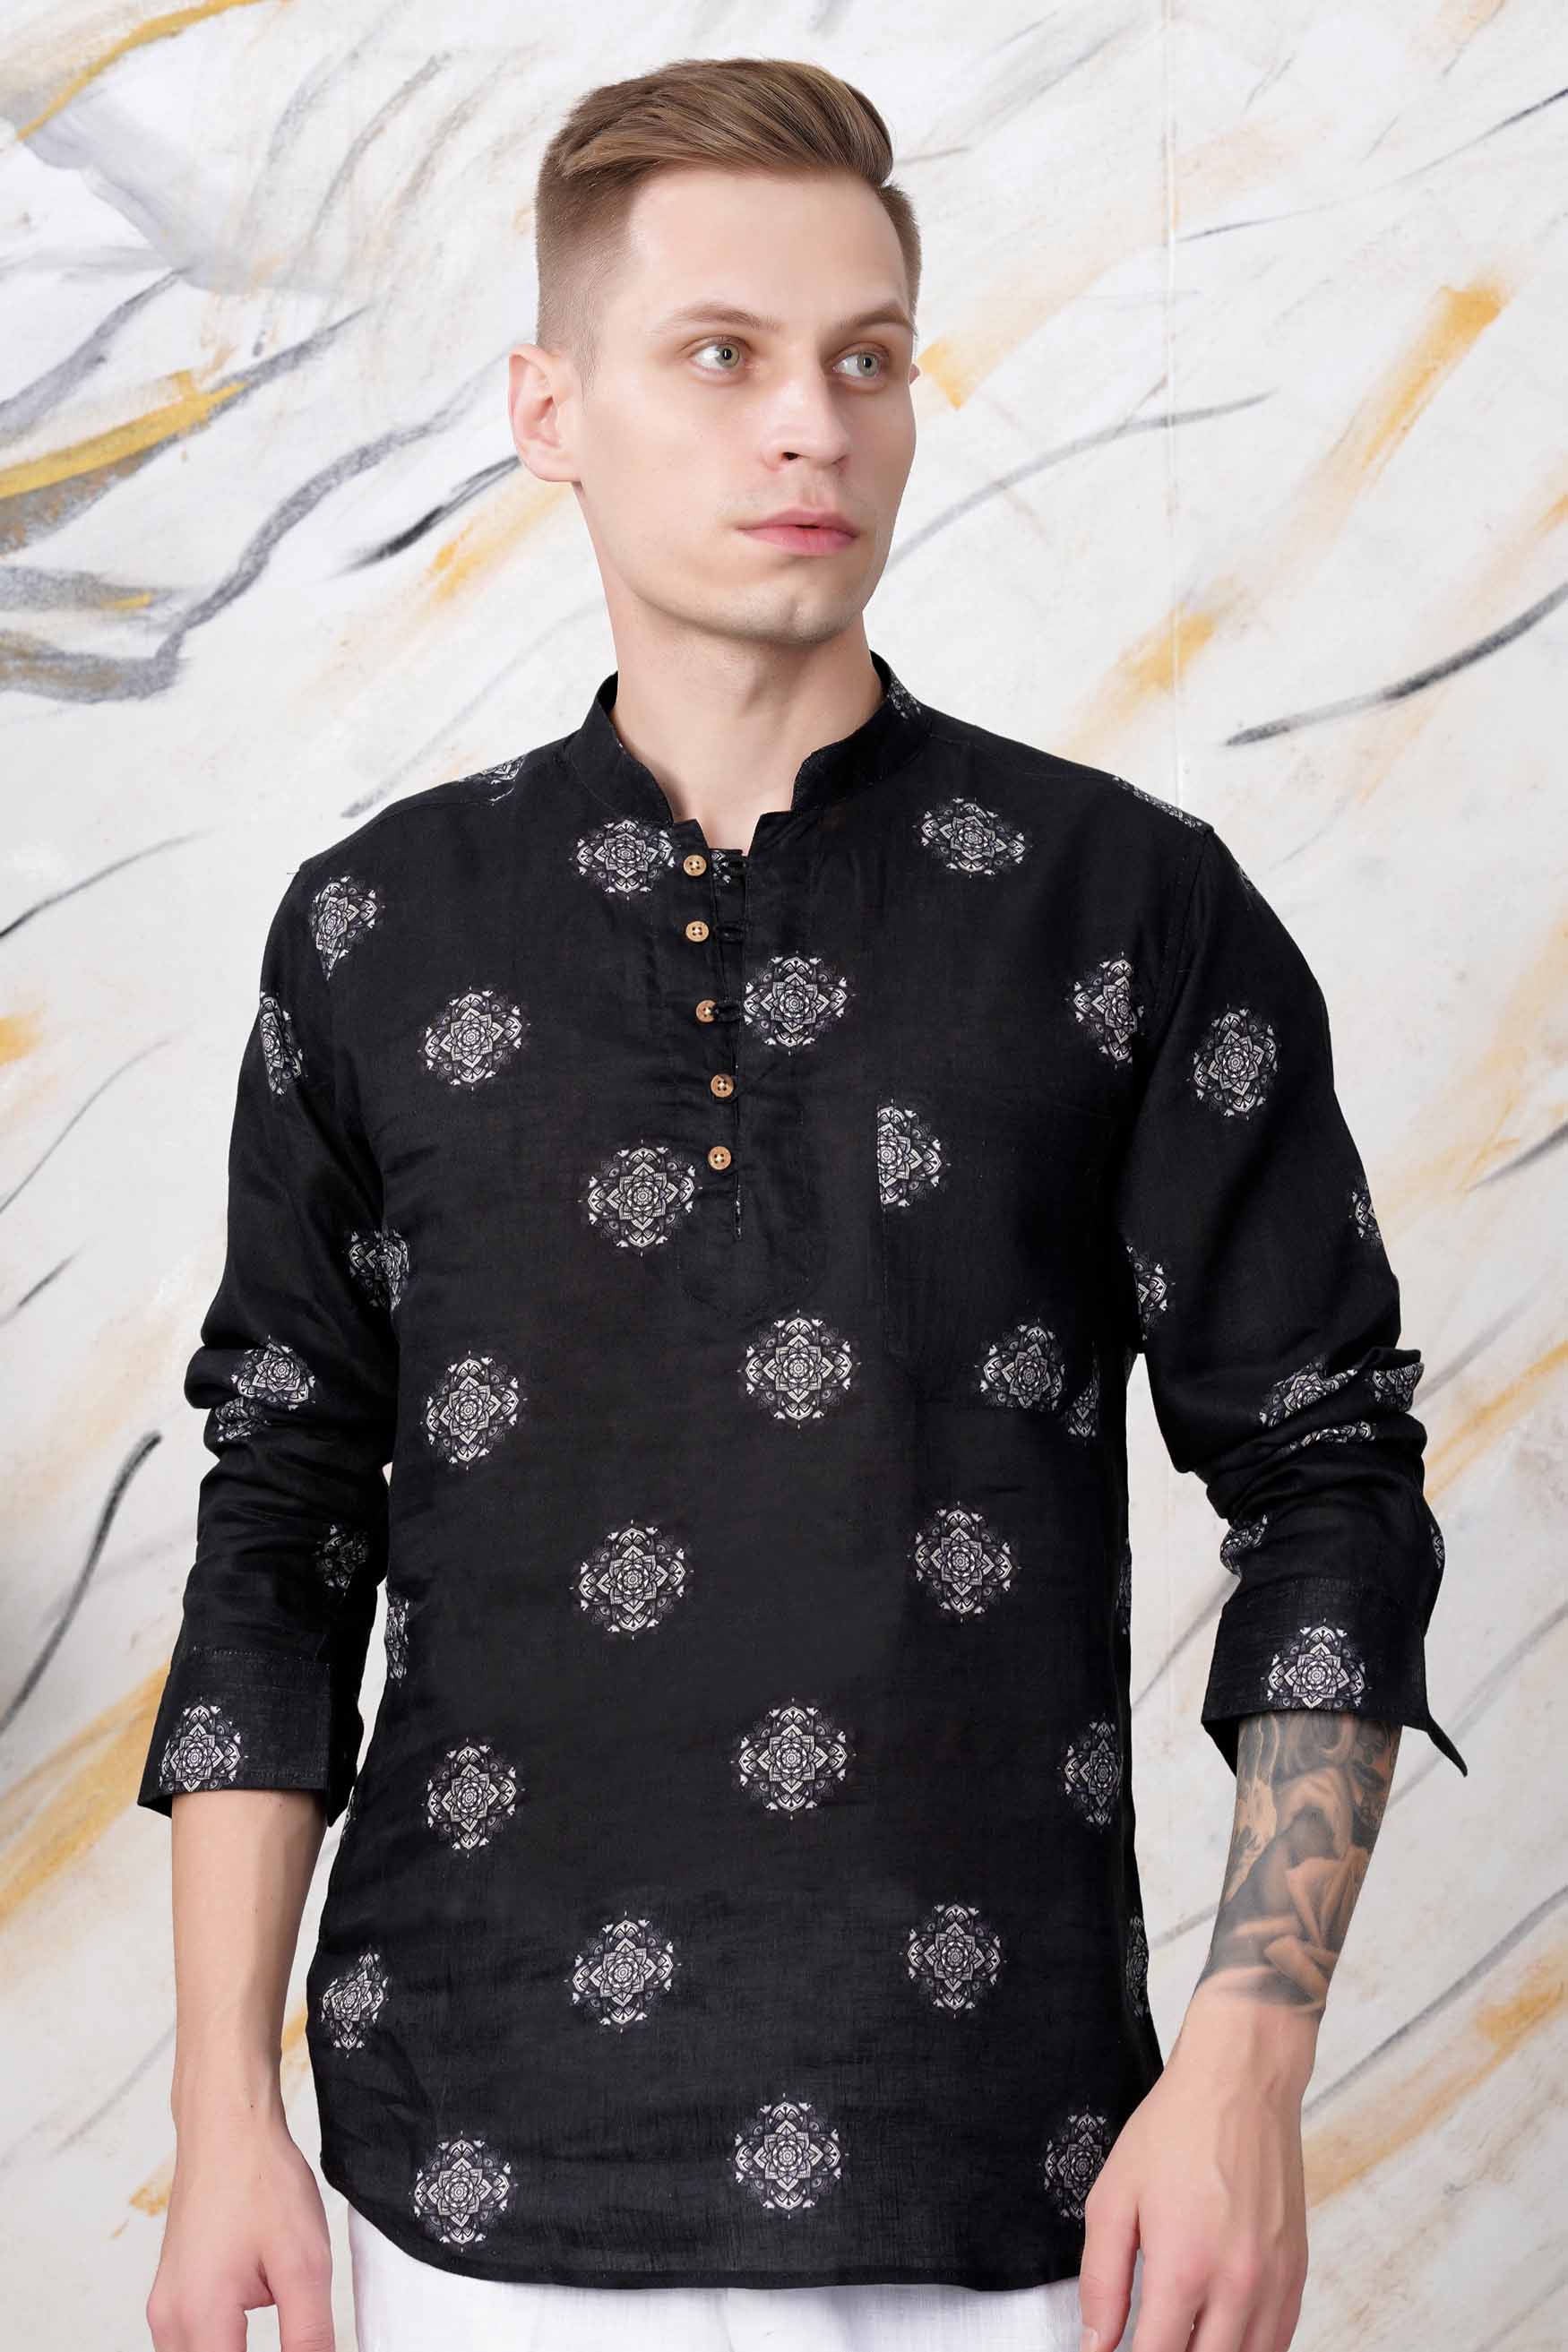 Jade Black and White Floral Printed Luxurious Linen Kurta Shirt 11487-KS-38, 11487-KS-H-38, 11487-KS-39, 11487-KS-H-39, 11487-KS-40, 11487-KS-H-40, 11487-KS-42, 11487-KS-H-42, 11487-KS-44, 11487-KS-H-44, 11487-KS-46, 11487-KS-H-46, 11487-KS-48, 11487-KS-H-48, 11487-KS-50, 11487-KS-H-50, 11487-KS-52, 11487-KS-H-52